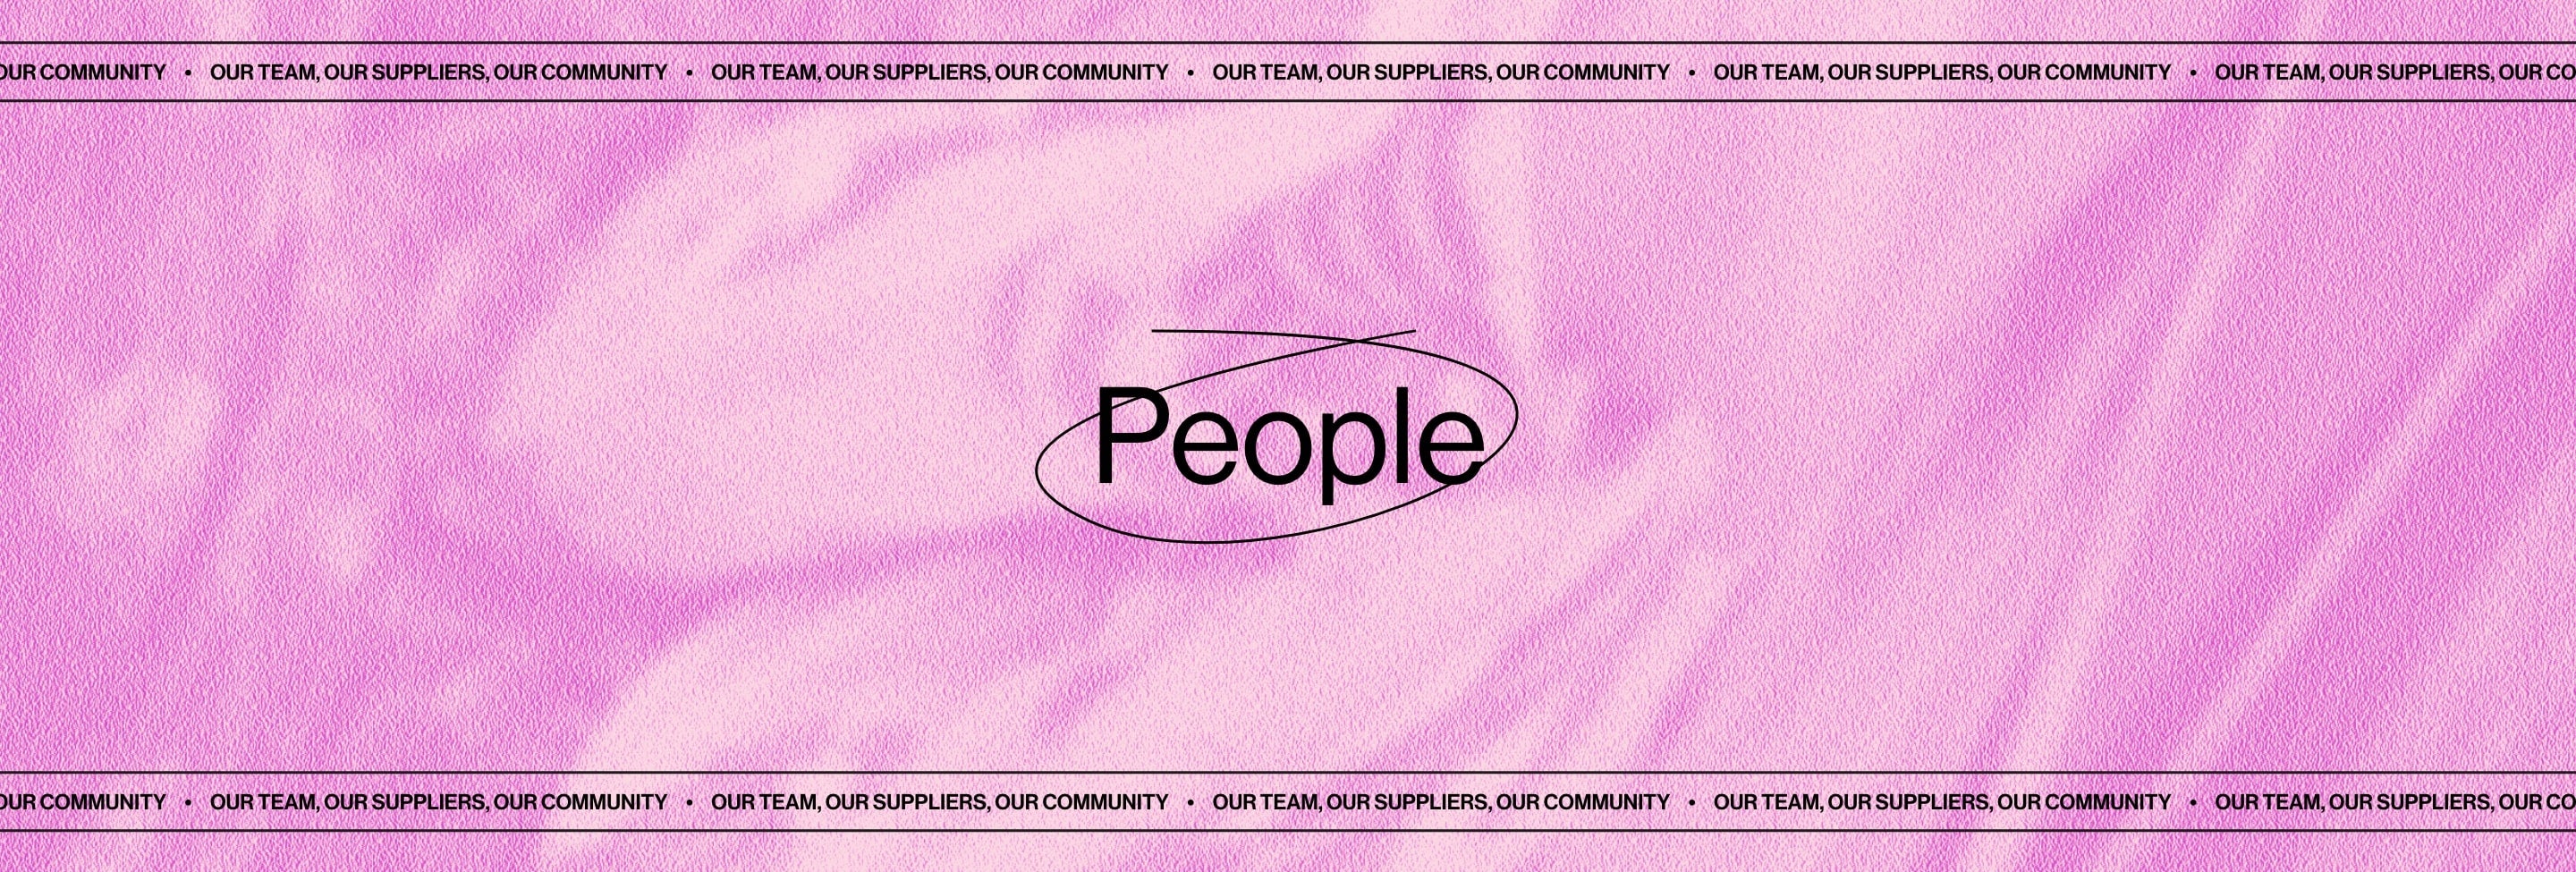 Our Brand Responsibility: People